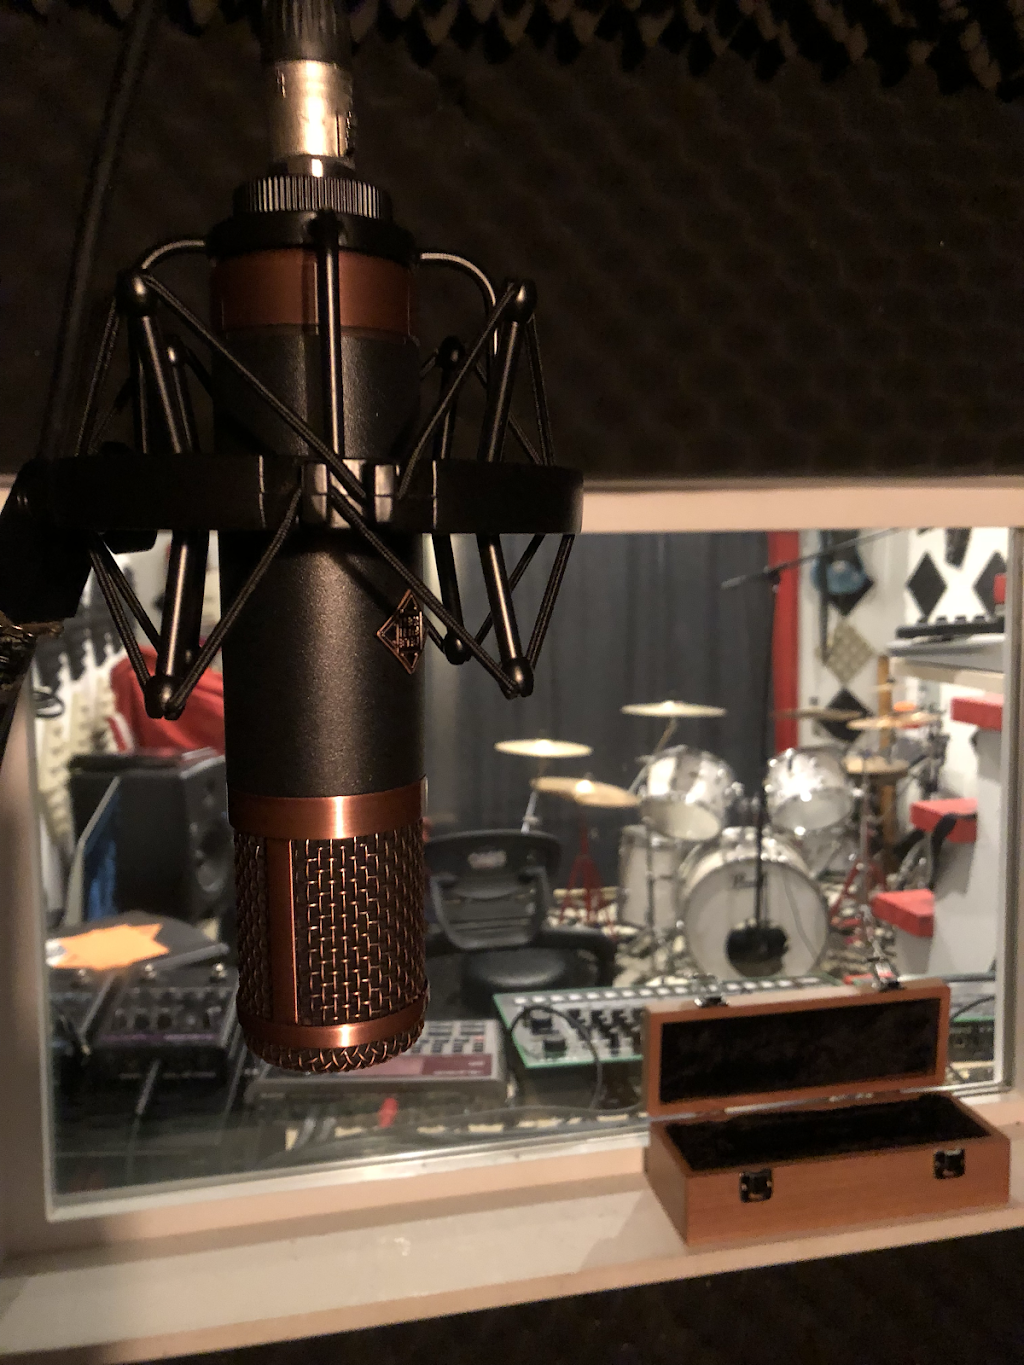 Oasis Music Studio | 19417 62A Ave, Surrey, BC V3S 7L7, Canada | Phone: (778) 809-4134